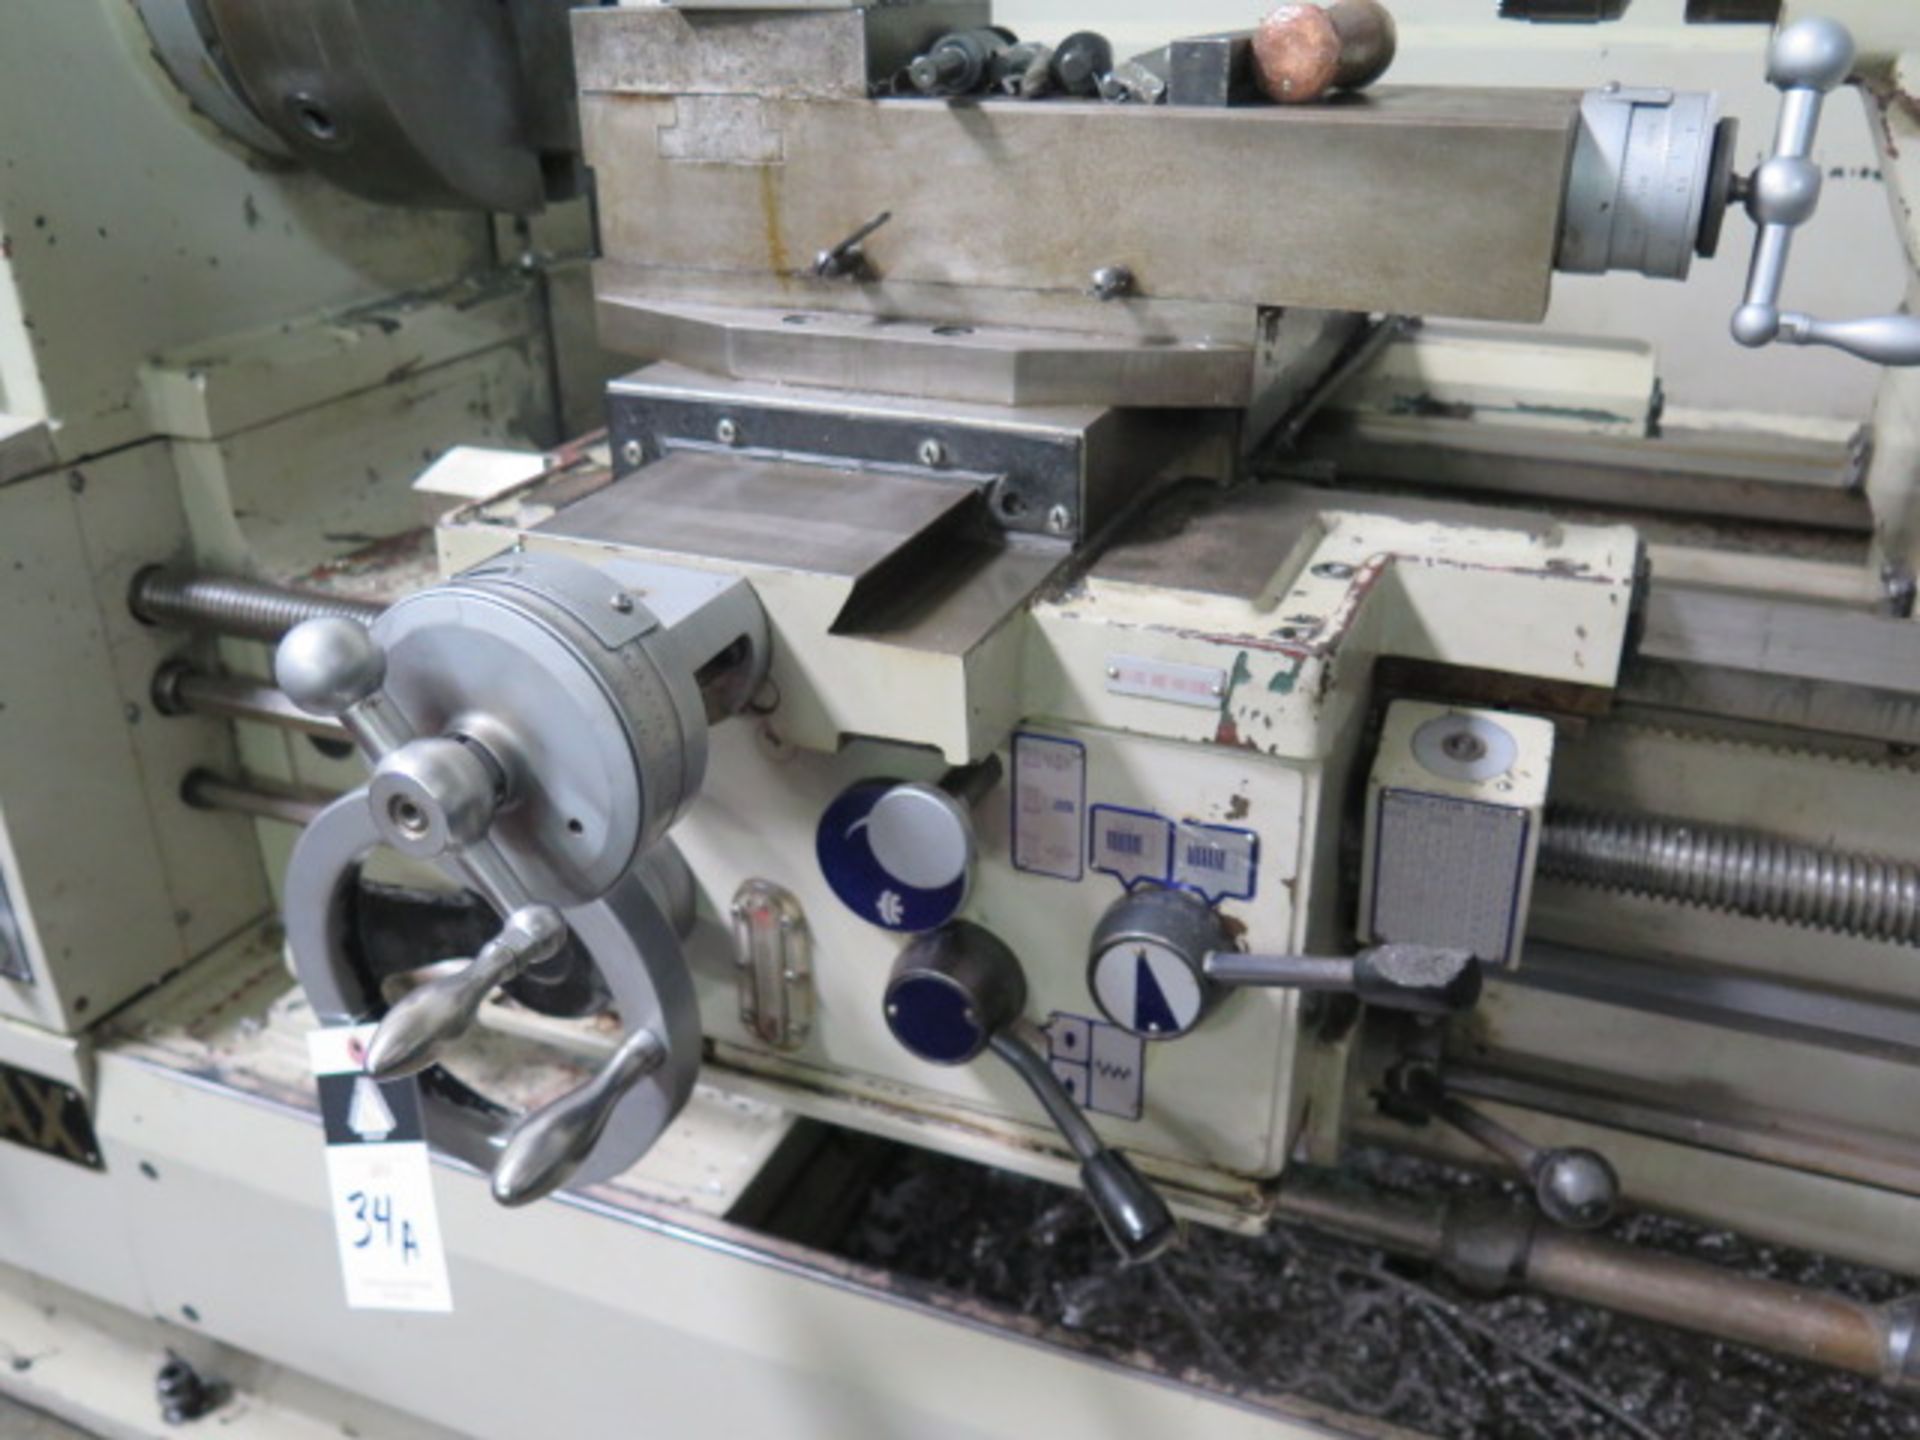 Supermax LG2236G 22" x 36" Geared Head Gap Bed Lathe w/ Sony DRO, 20-1550 RPM, Inch/mm, SOLD AS IS - Image 8 of 18